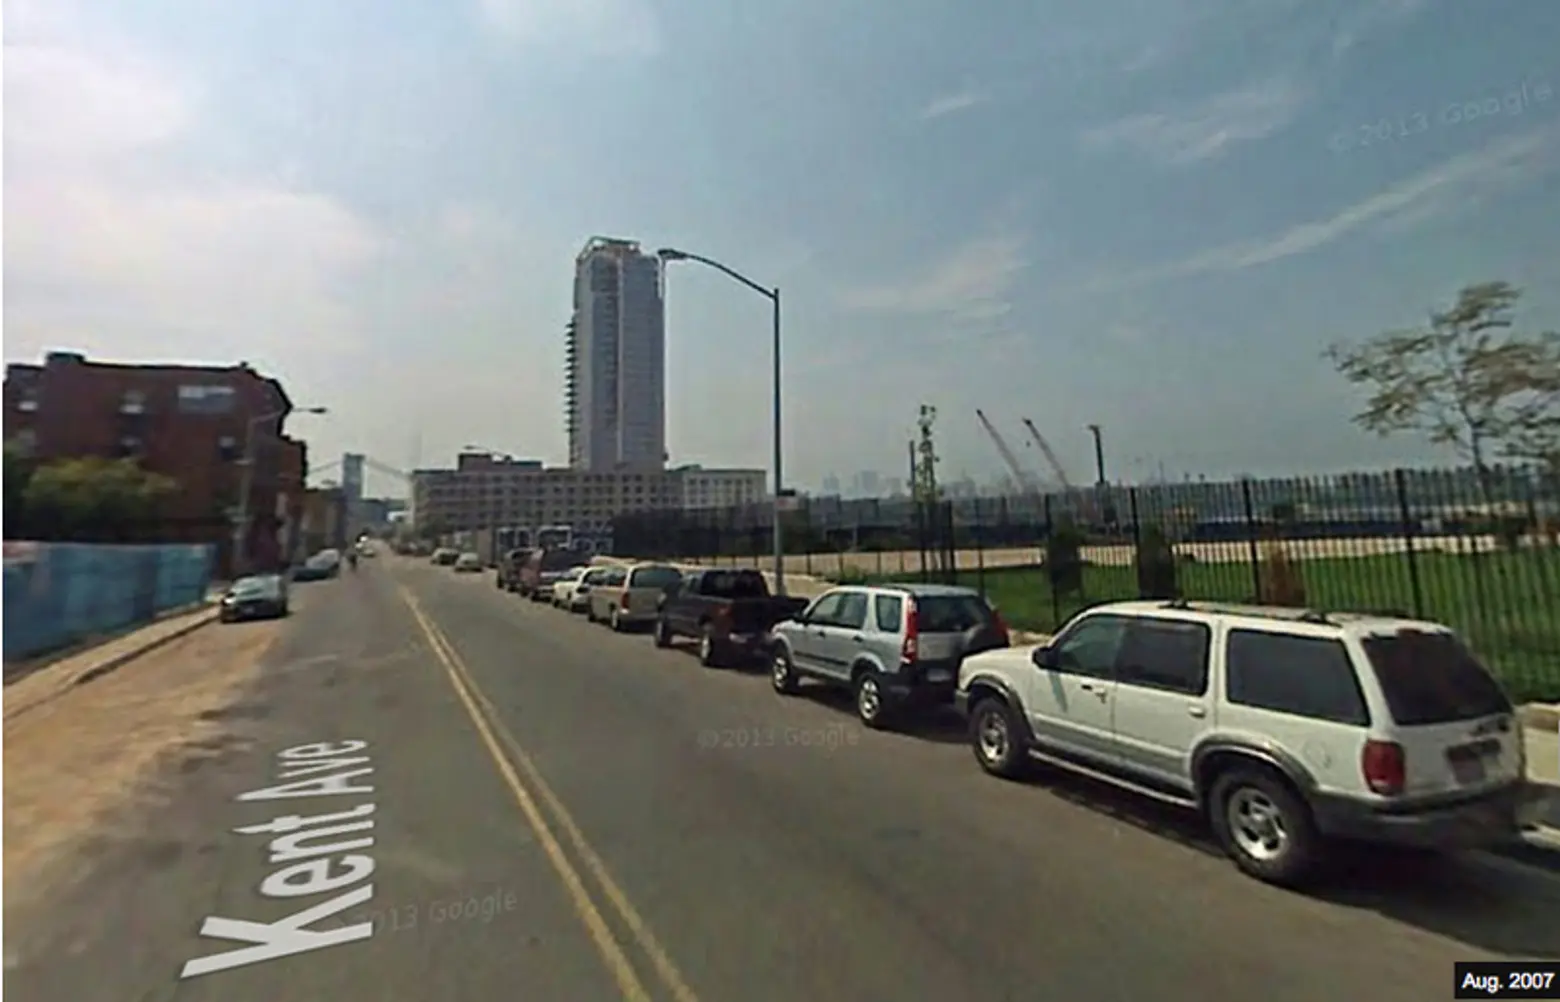 Williamsburg, Have You Had Work Done? Google Maps Street View Shows Us How Much the Neighborhood Has Changed Since 2007